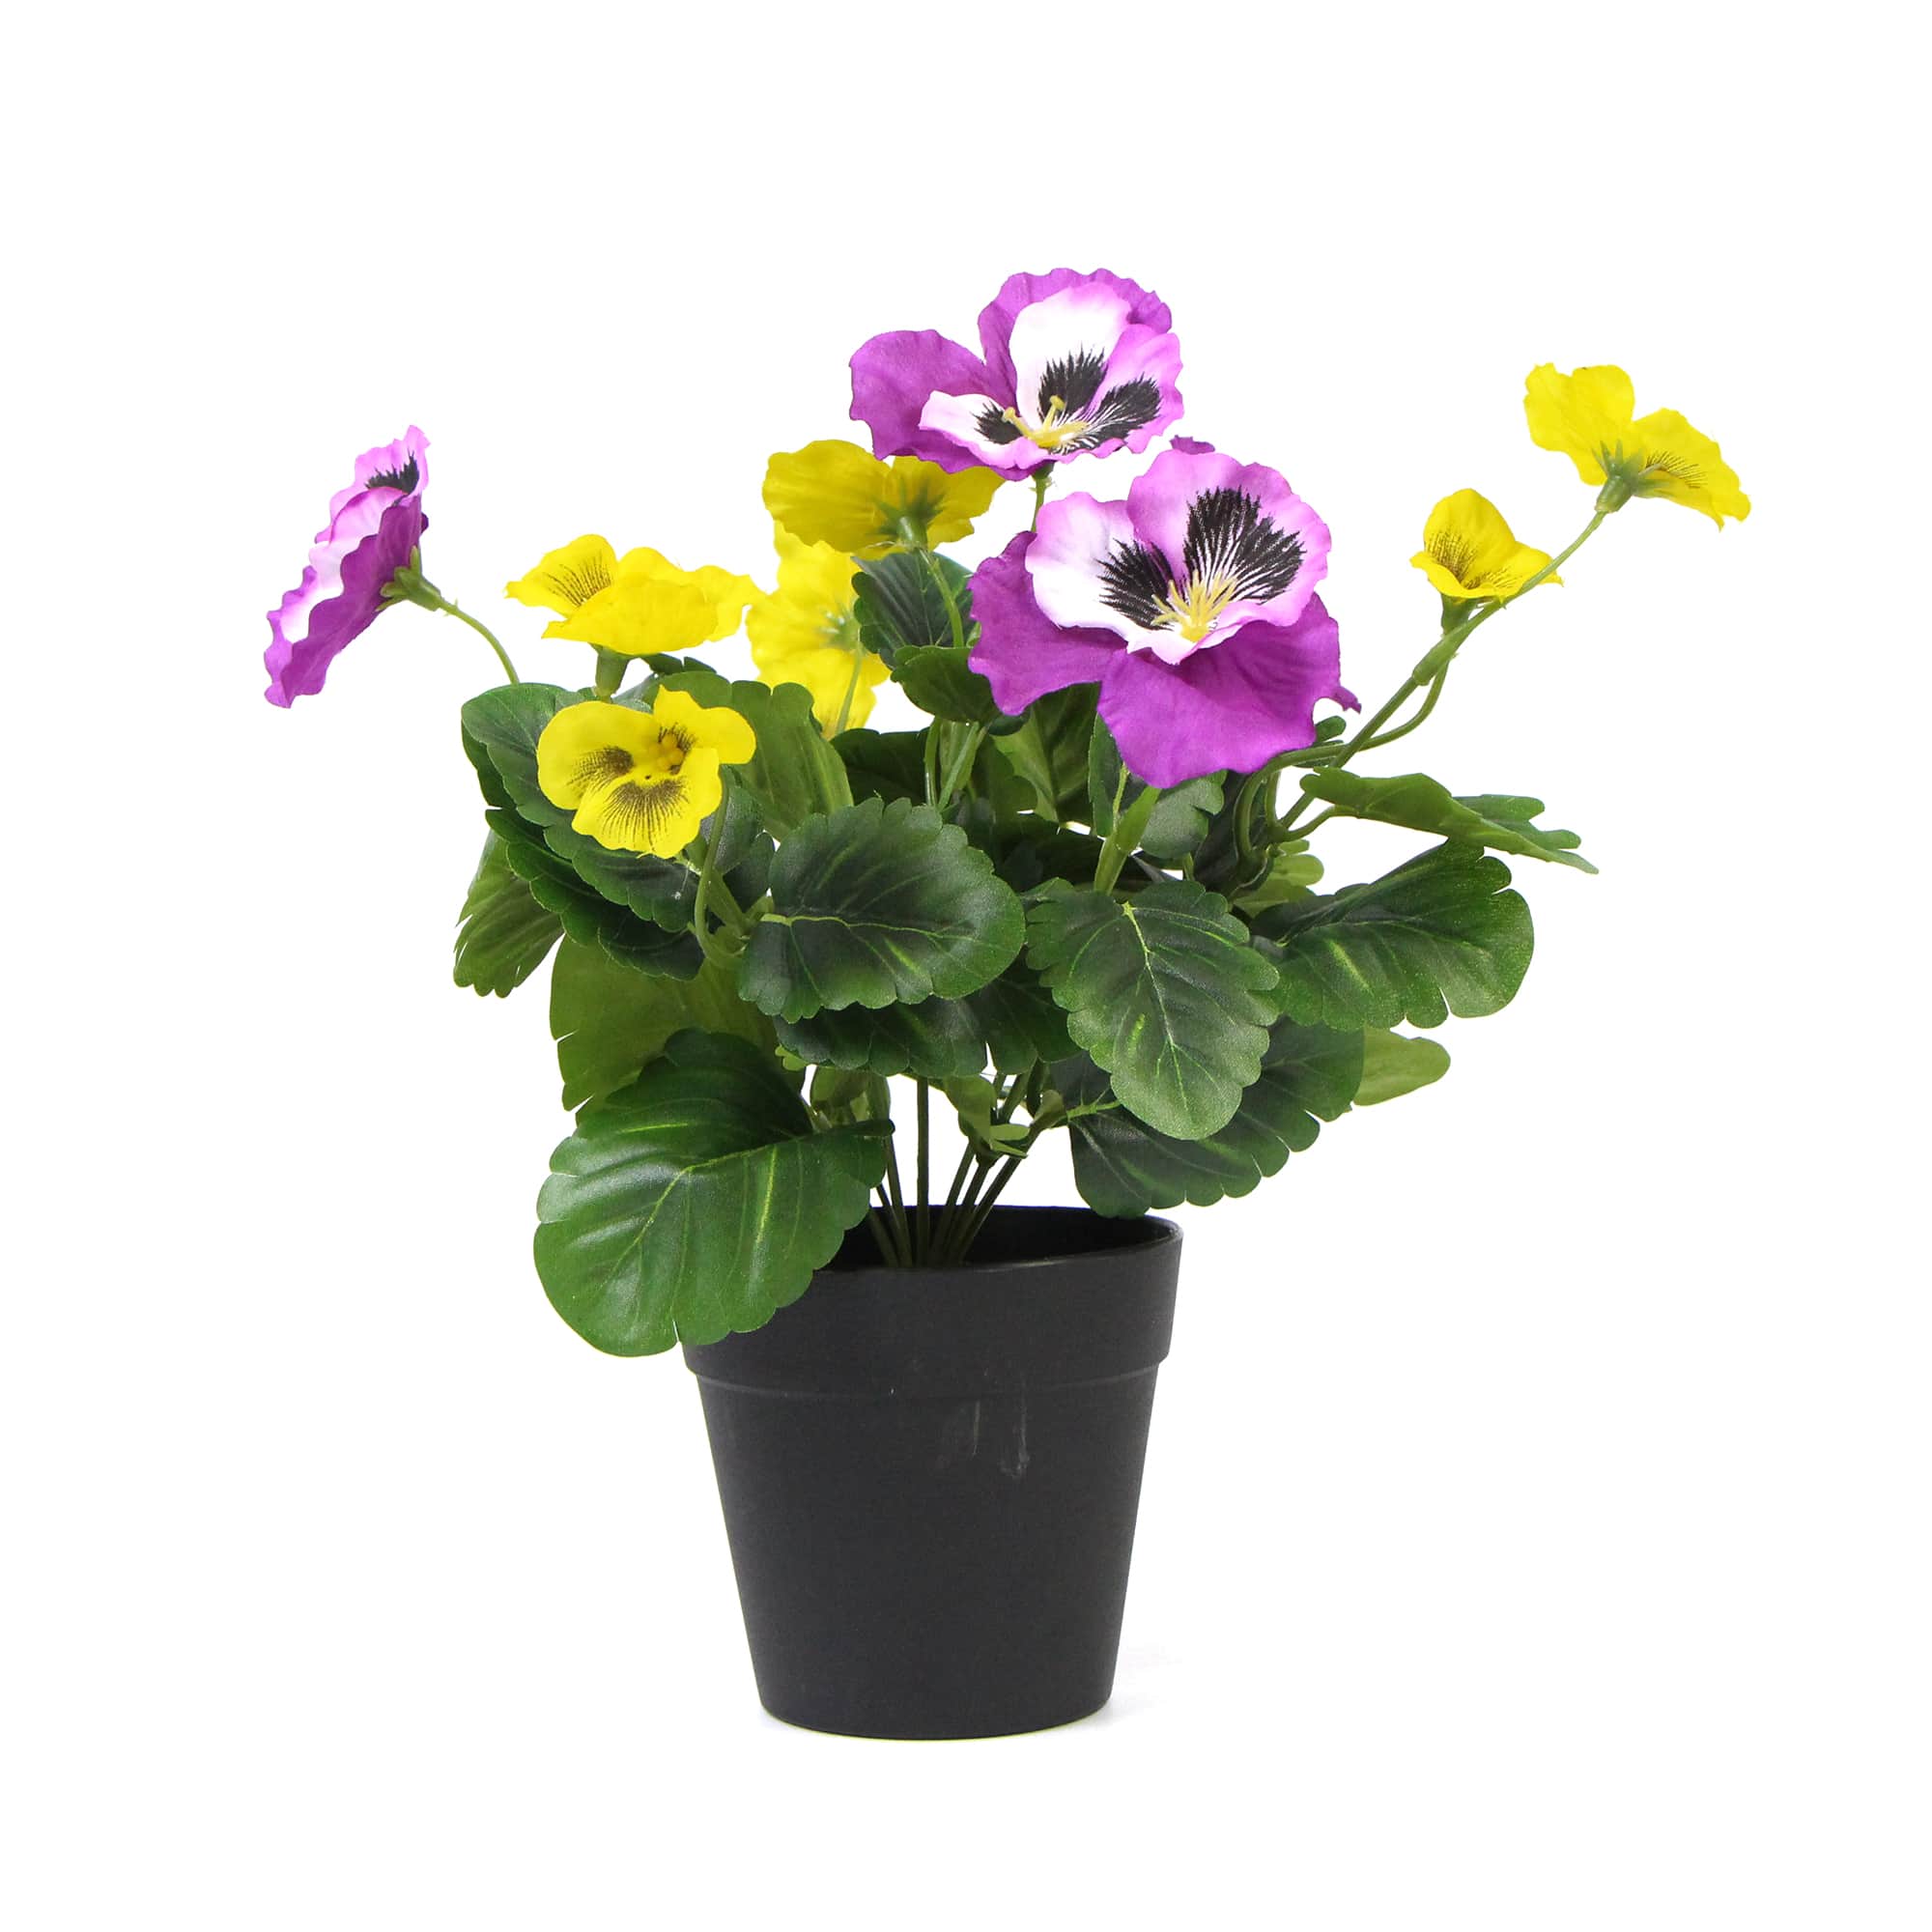 mixed-pink-and-yellow-flowering-potted-artificial-pansy-plants-25cm-772247.jpg